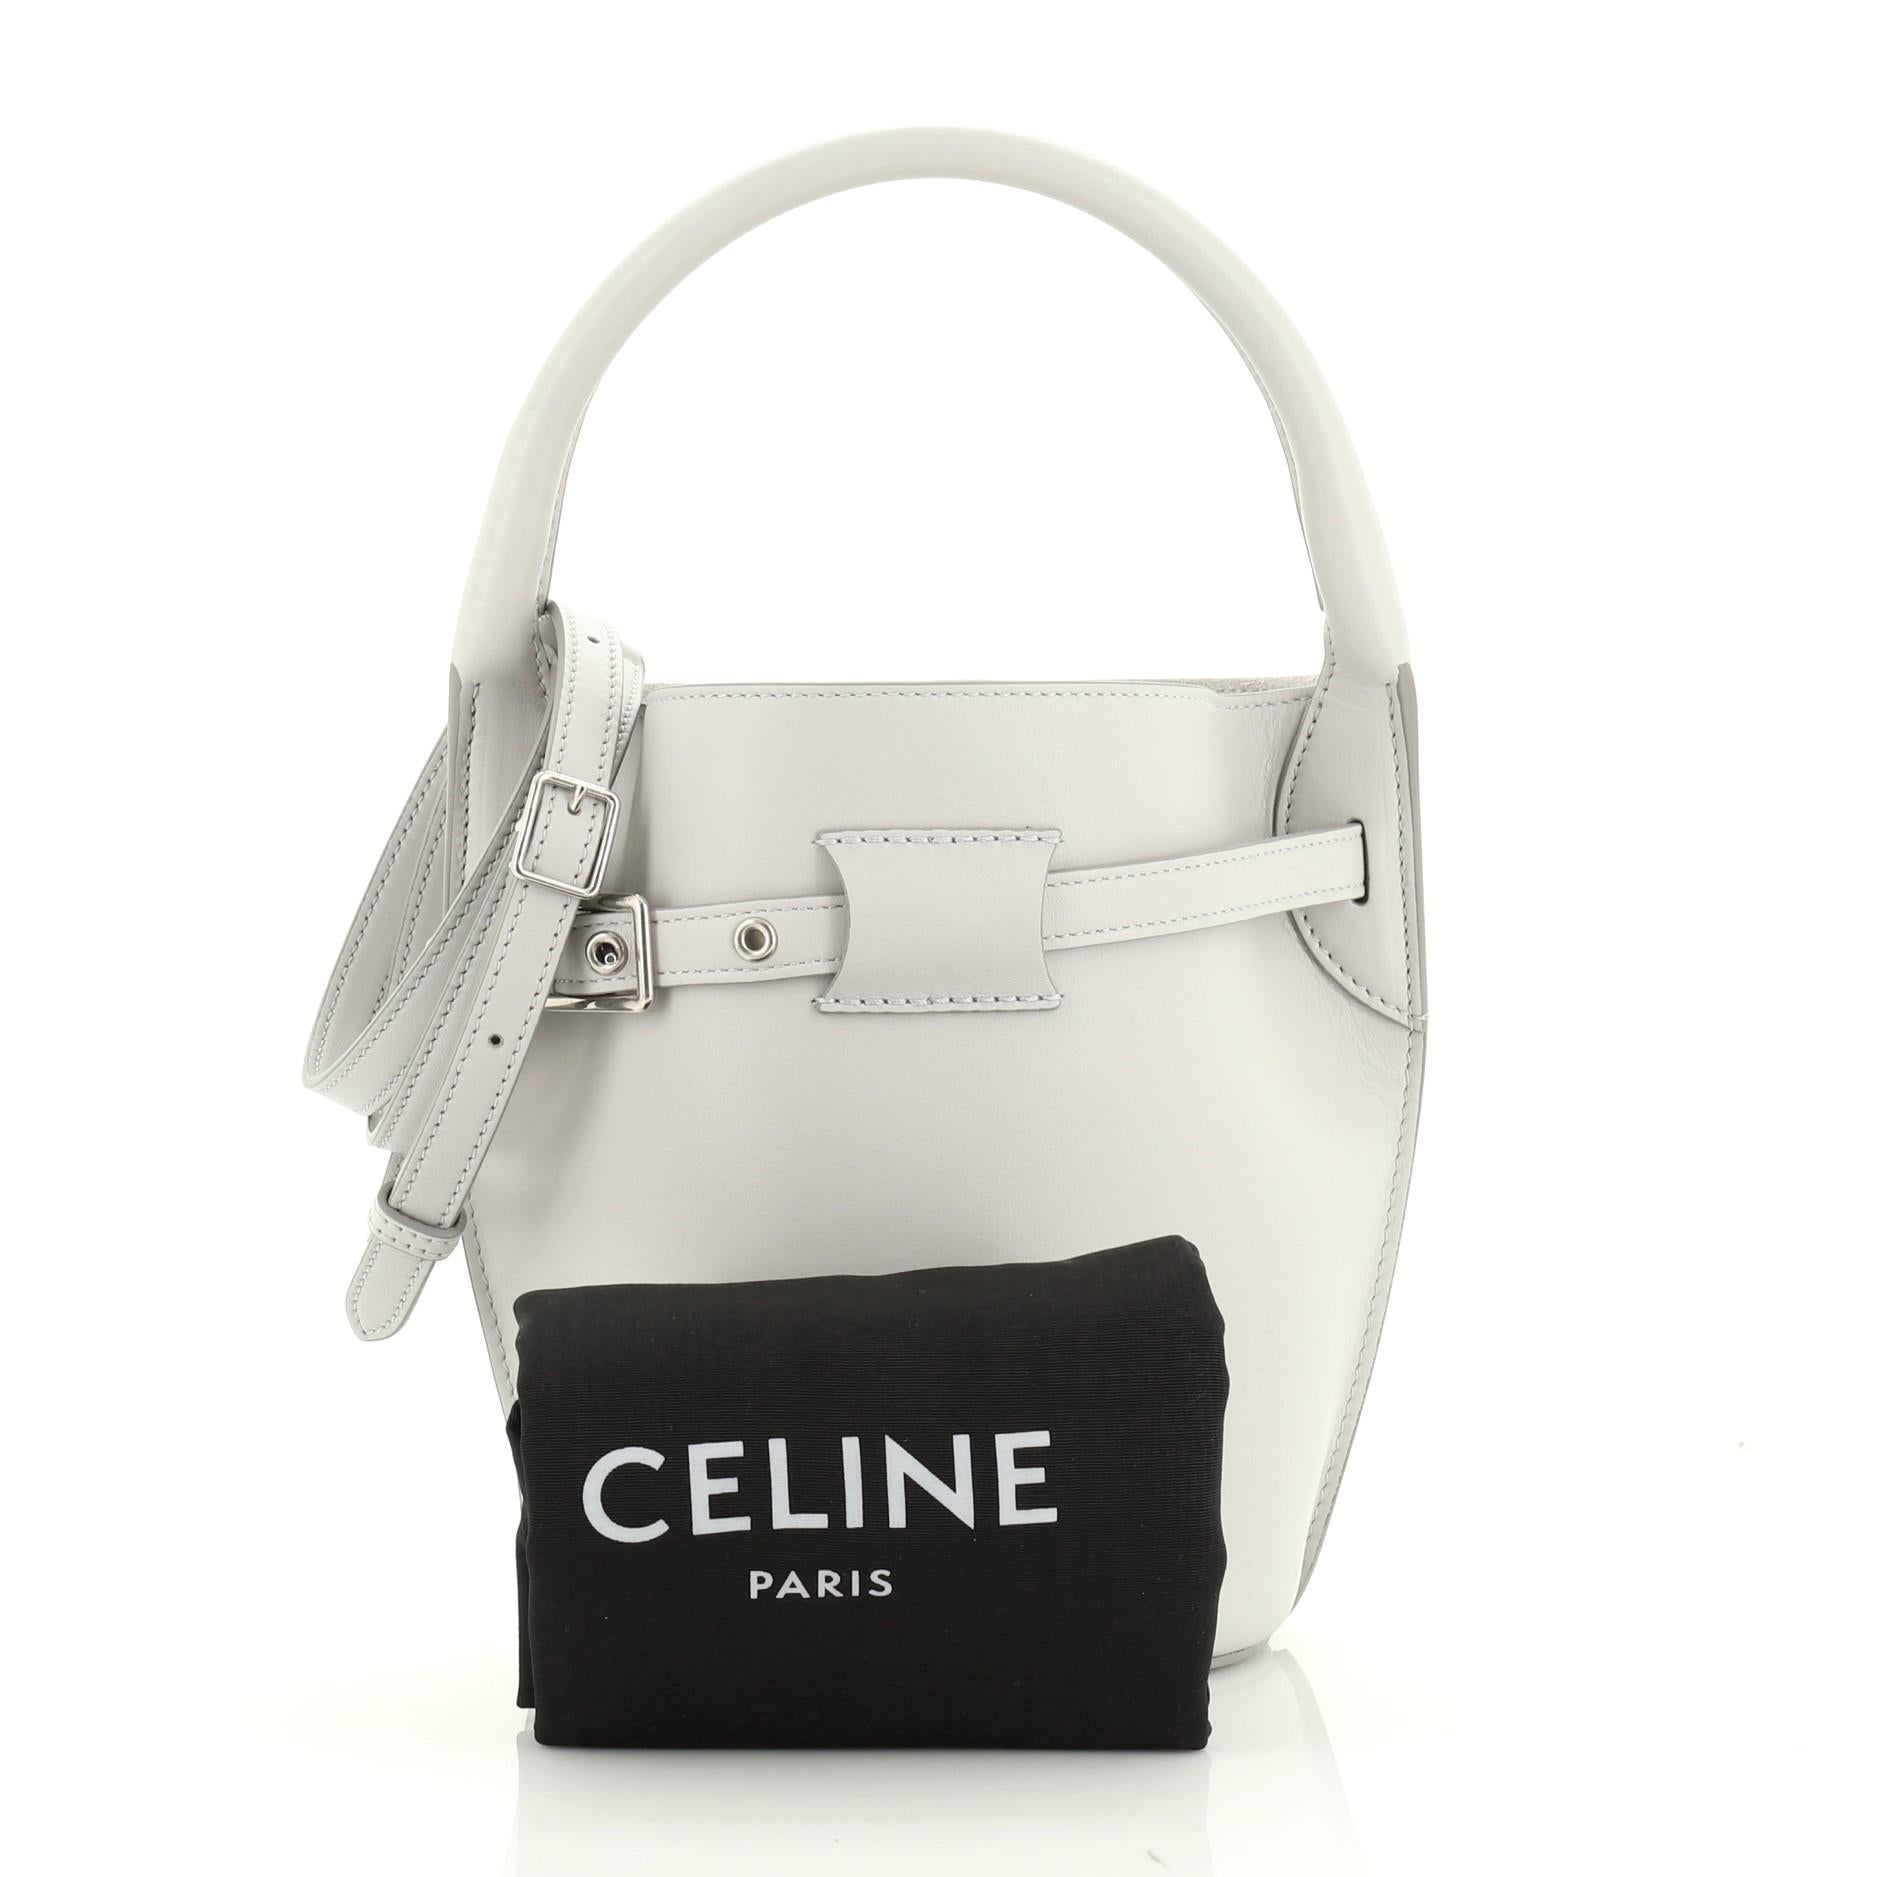 This Celine Big Bag Bucket Leather Nano, crafted in gray leather, features long leather strap, and silver-tone hardware. Its belt drawstring closure opens to a gray suede interior with side slip pocket. 

Estimated Retail Price: $1,950
Condition: